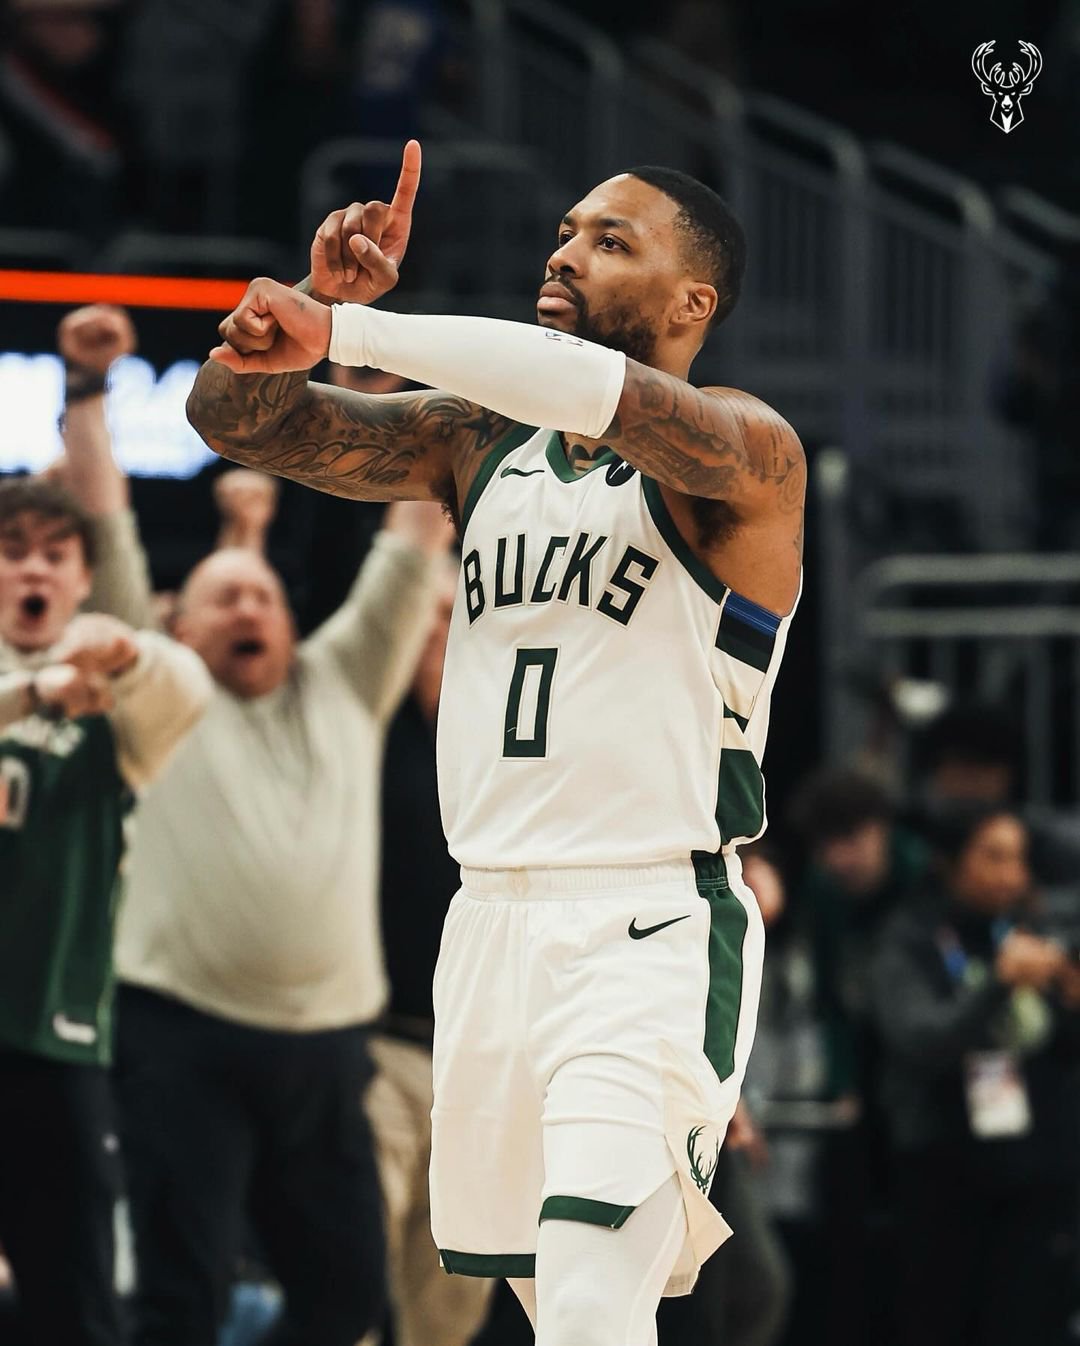 The Bucks Continue Their Season, Doc Rivers and ‘The Mess’